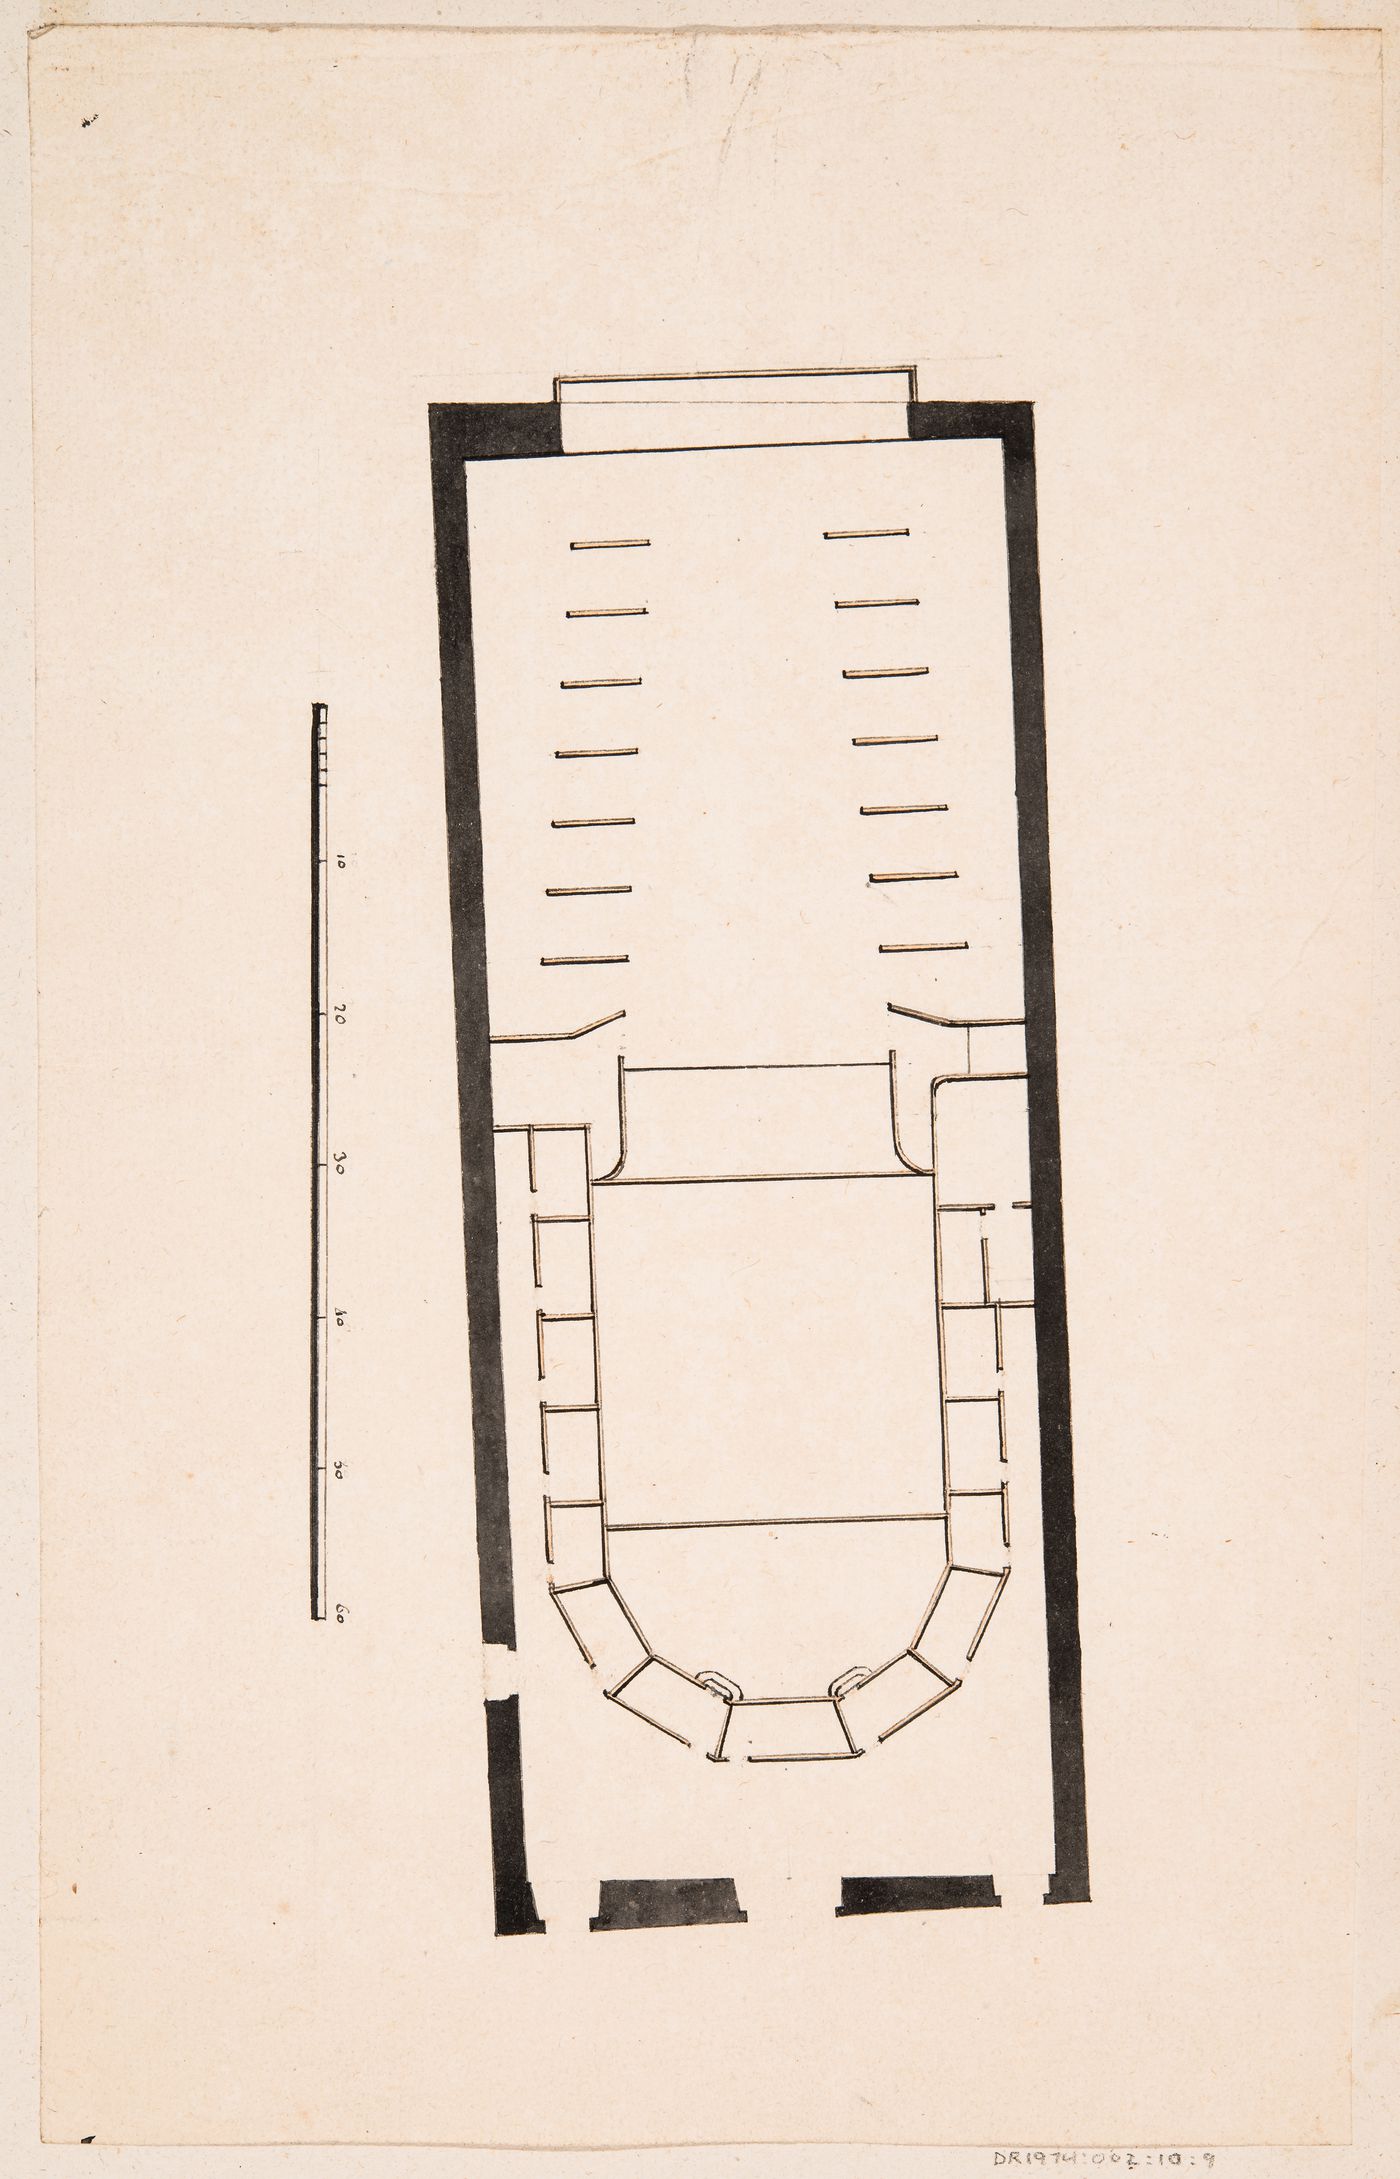 Plan of an unidentified theatre